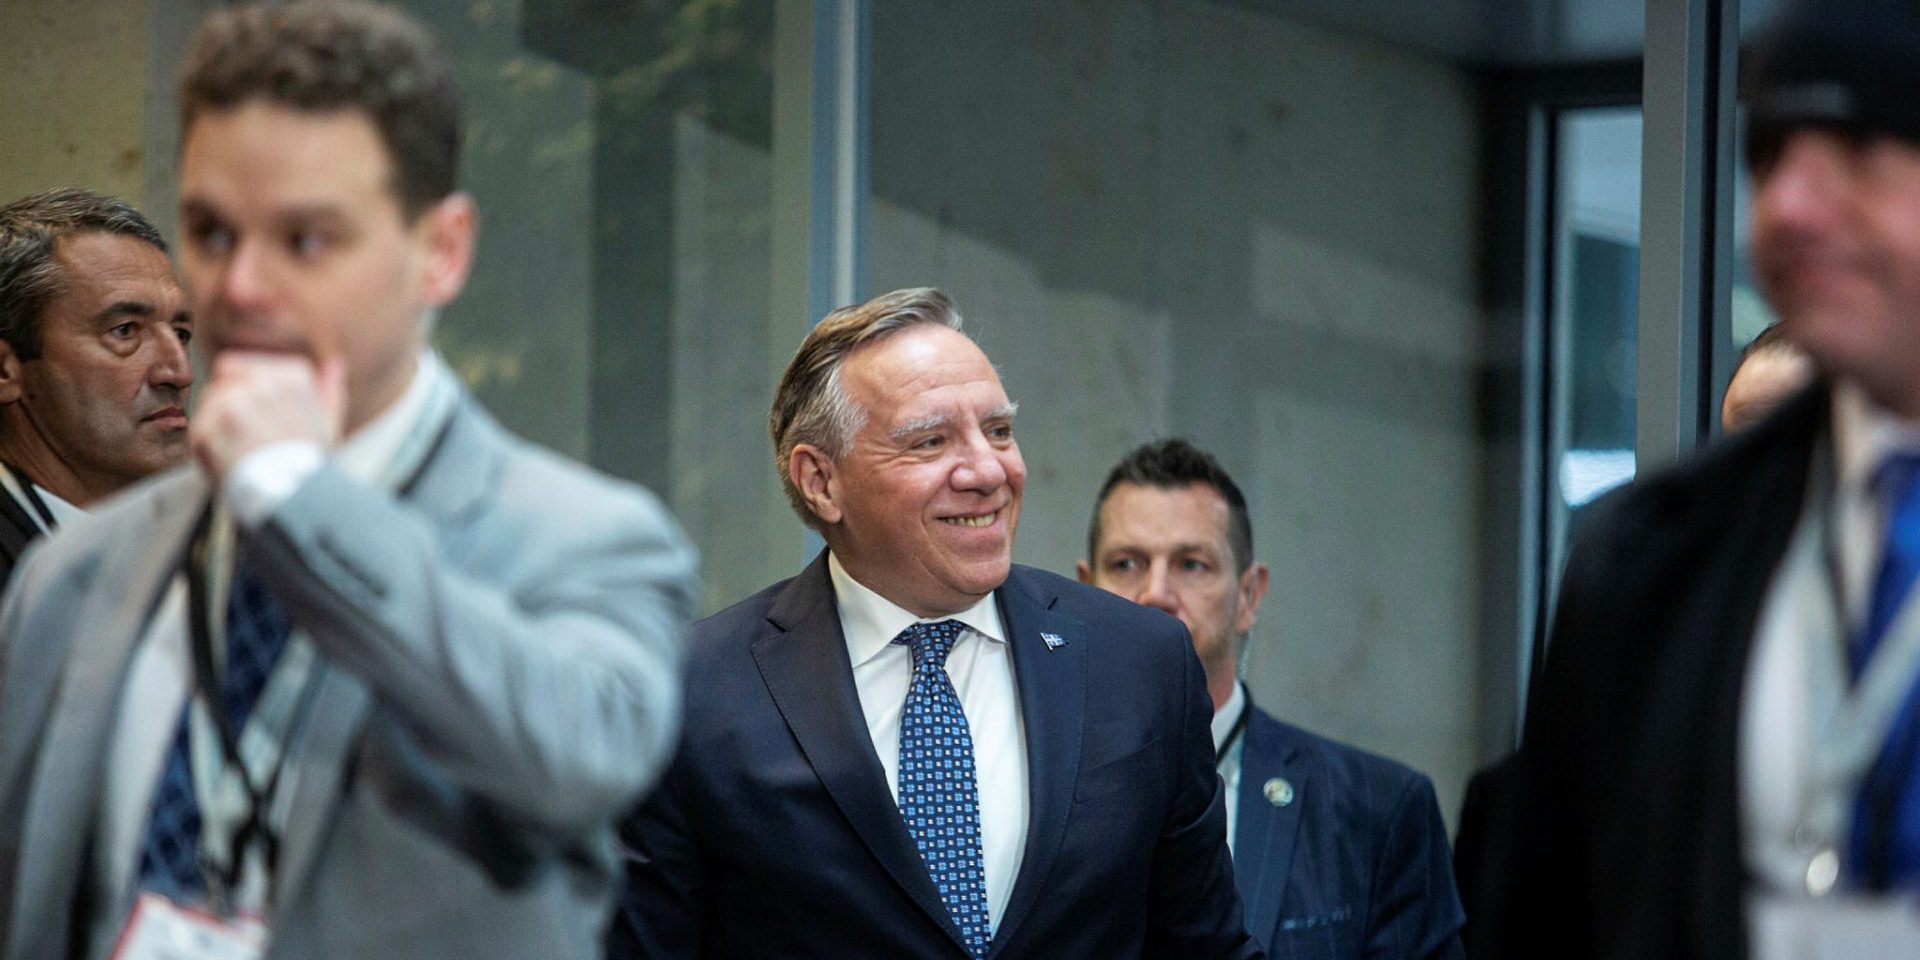 Quebec Premier Francois Legault joins the country’s other premiers at 90 Elgin St. in Ottawa on Feb. 7, 2023, to meet with the Prime Minister to discuss a healthcare deal. Andrew Meade